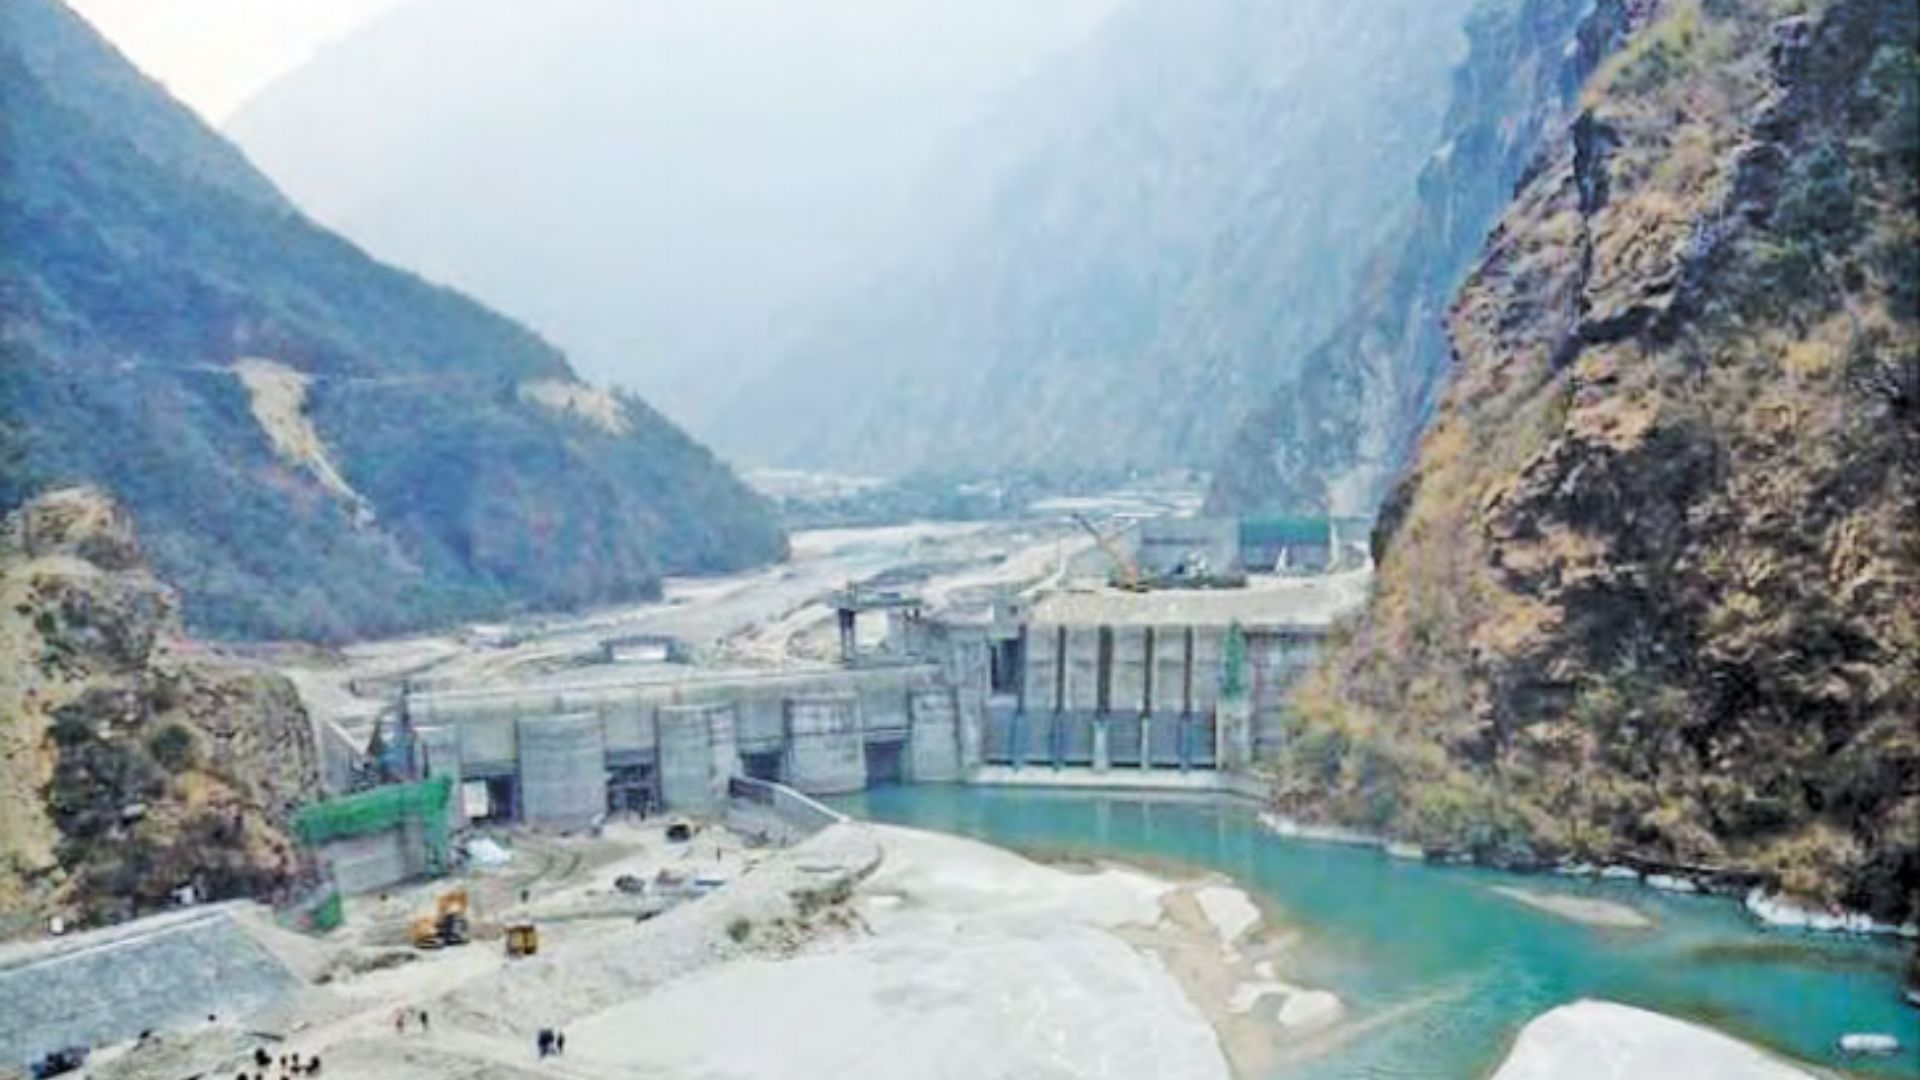 Nepal’s Largest Hydel Project, Built With Indian Aid, Achieves Major Milestone